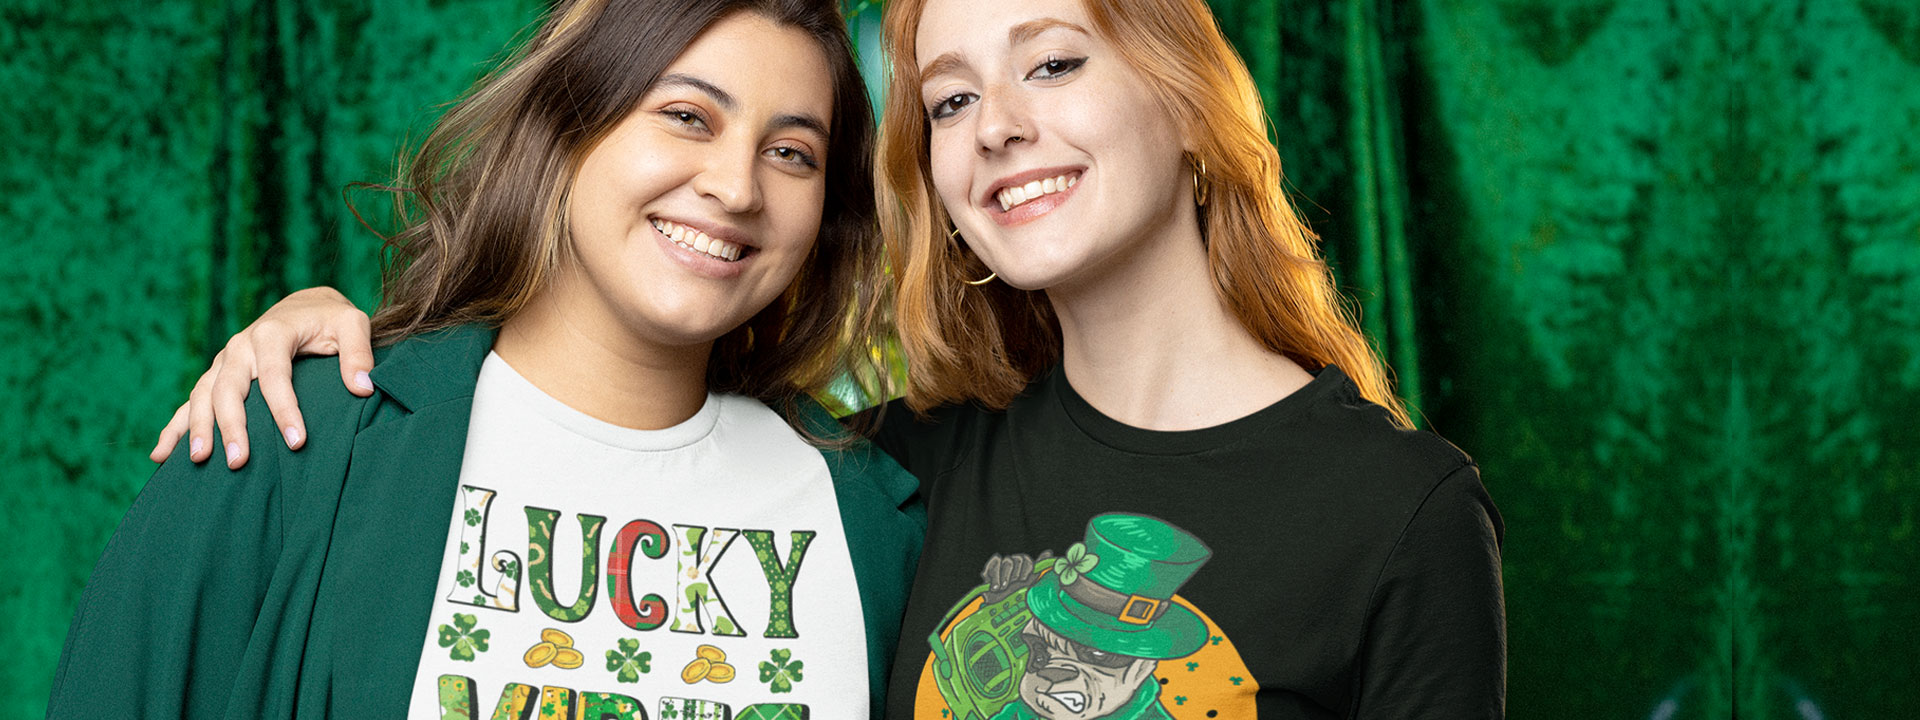 St. Patrick's Day T-shirt for women